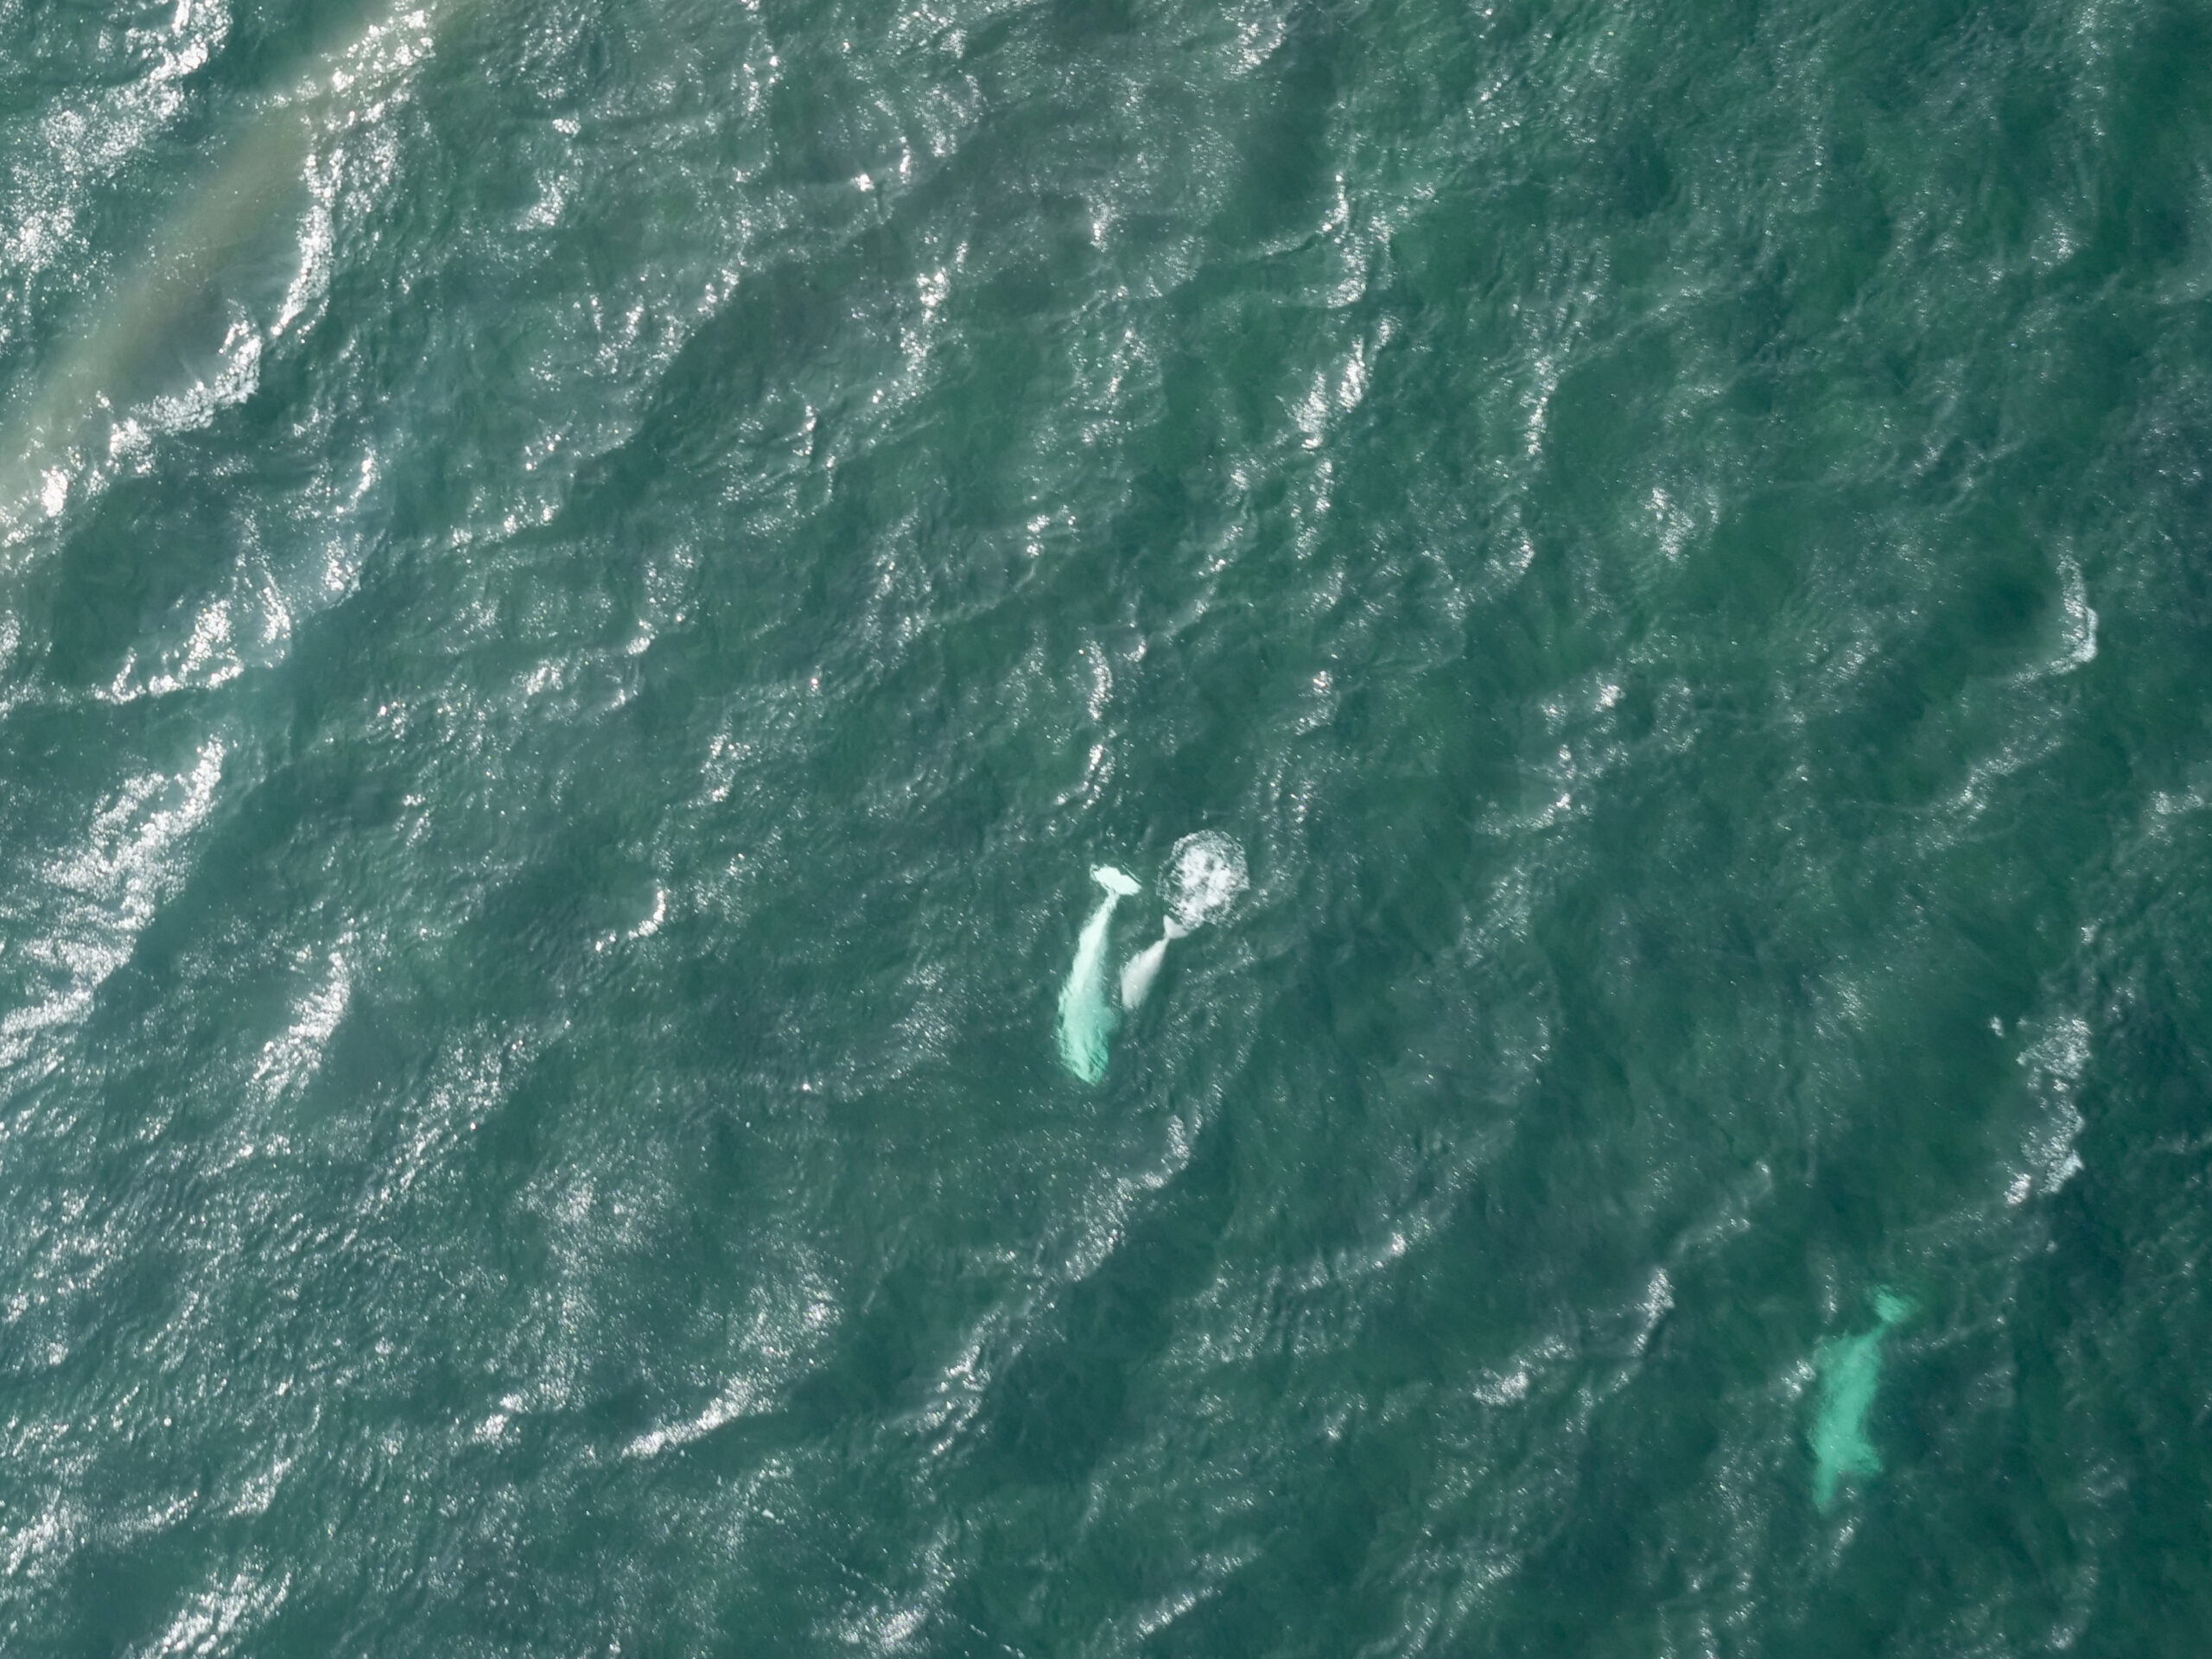 Beluga whales seen from the air above Hudson Bay